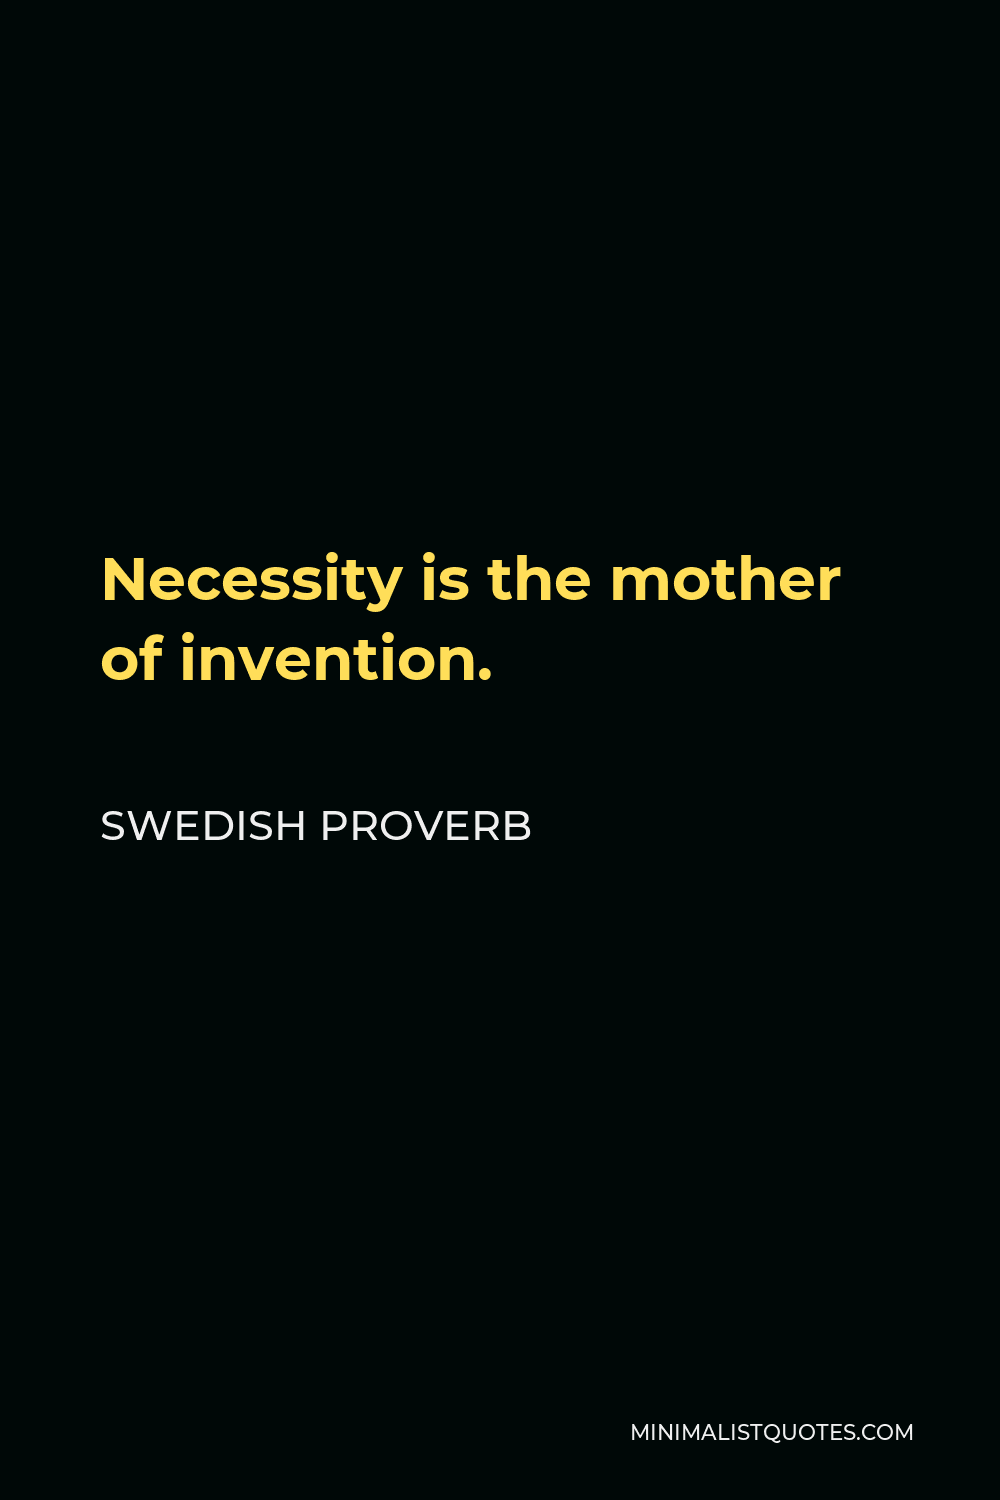 Swedish Proverb Quote - Necessity is the mother of invention.